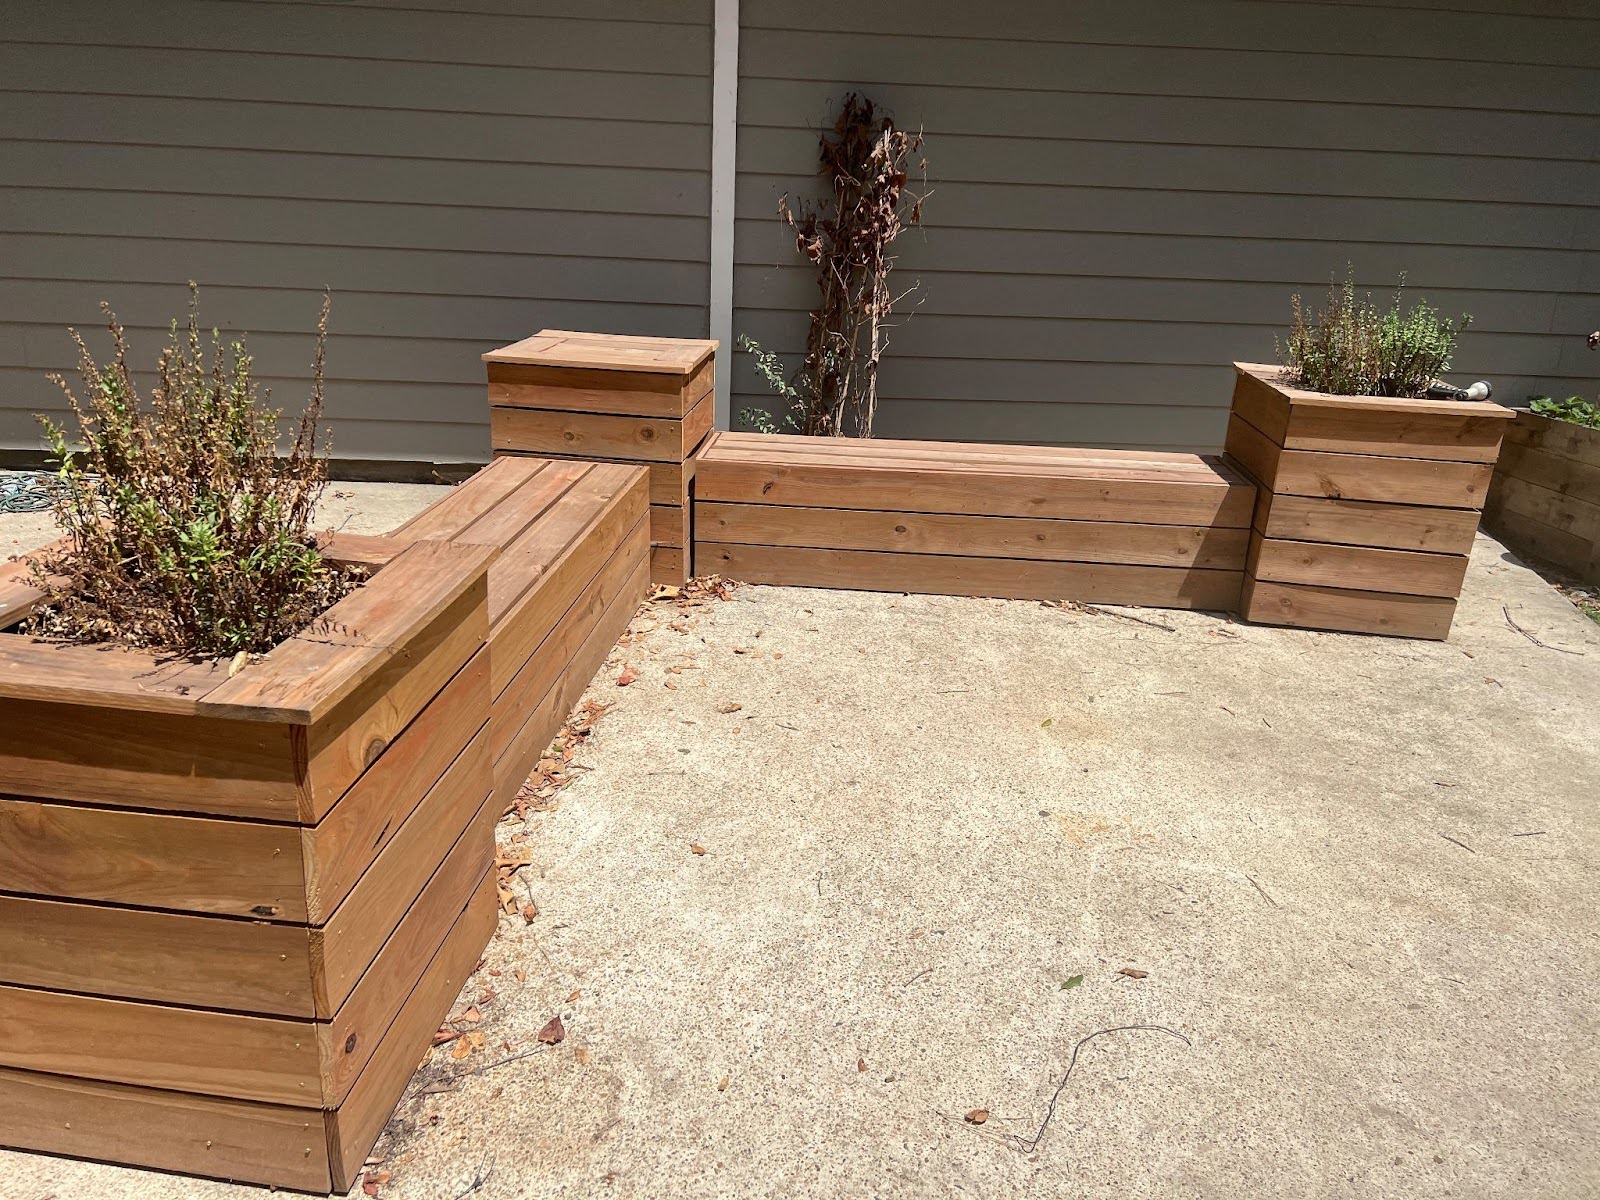 A corner bench made out of pressure treated lumber with garden boxes built in.